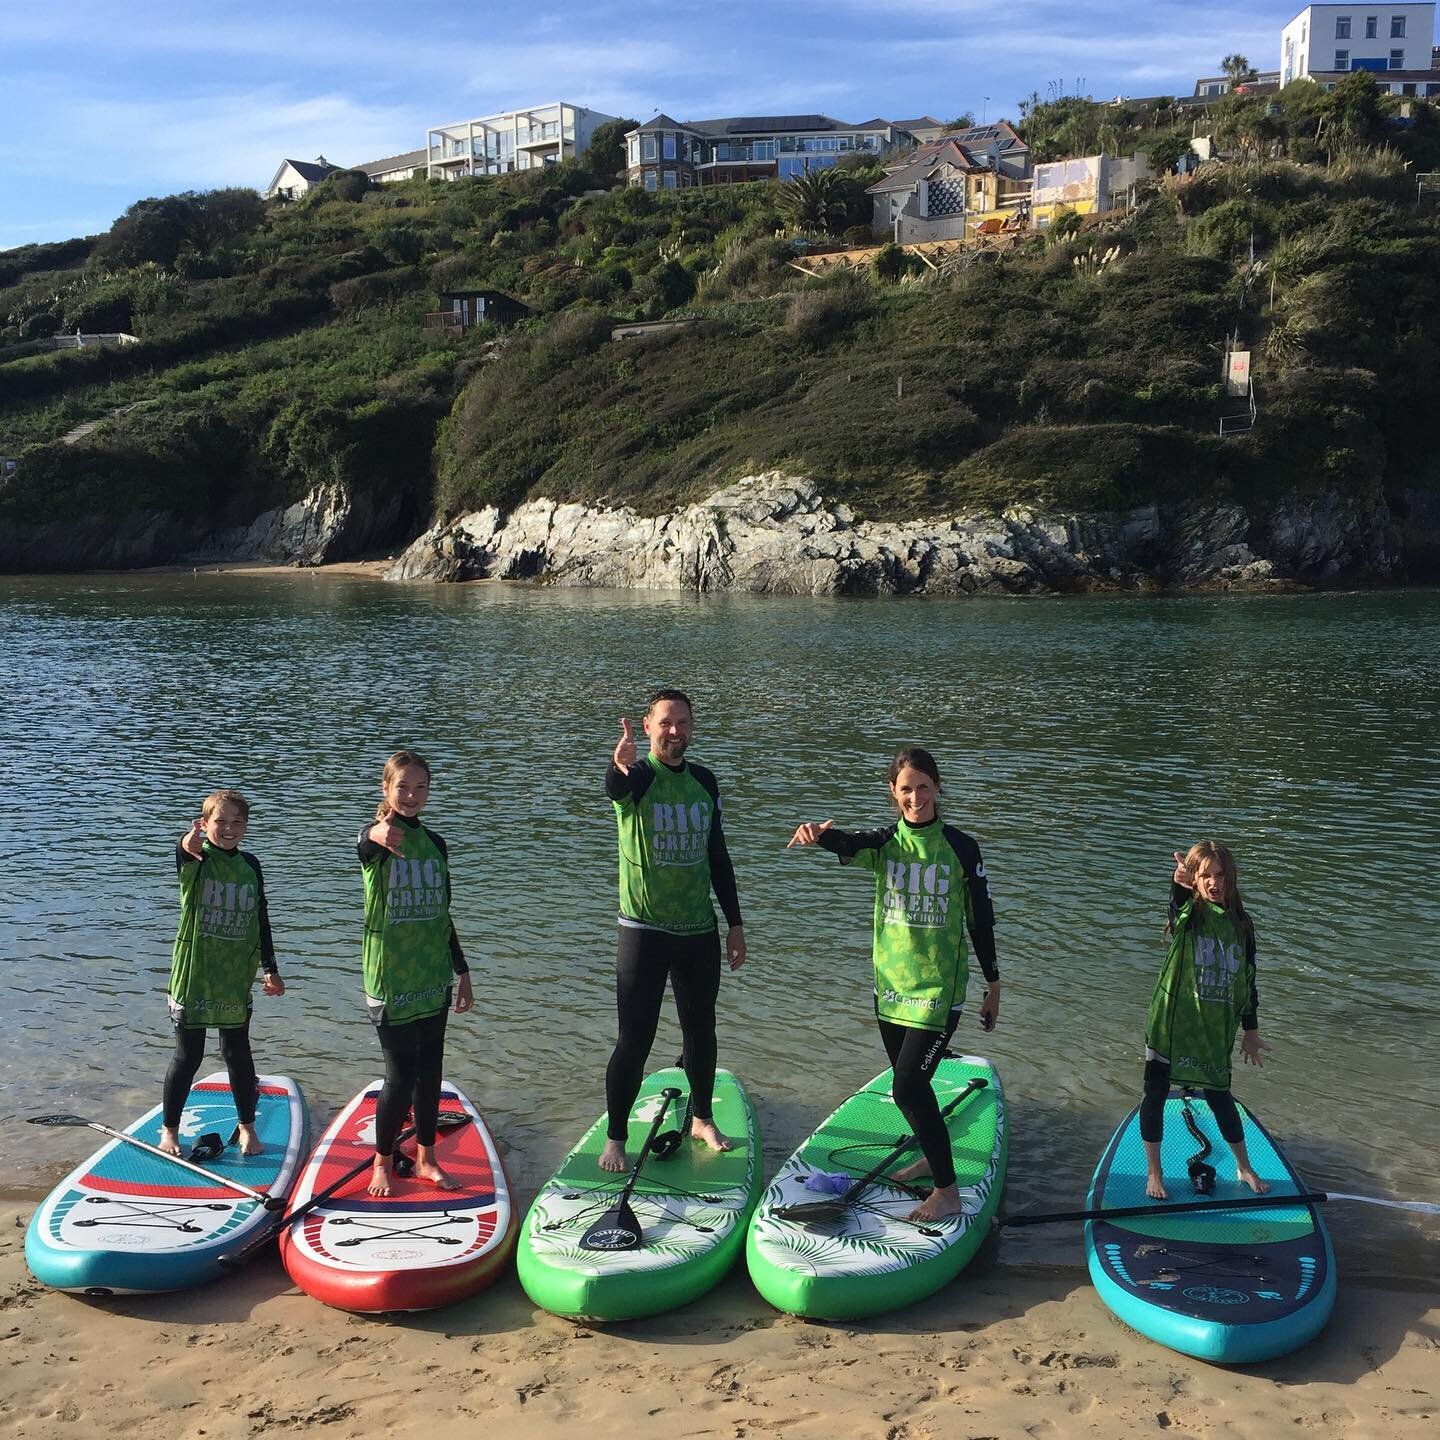 What&rsquo;s your favourite family sport? We&rsquo;ve tried paddleboarding a few times and love it &ndash;&nbsp;it&rsquo;s fairly easy to pick up, it&rsquo;s great getting out onto the river (or canal or lake or sea) and it&rsquo;s something the whol